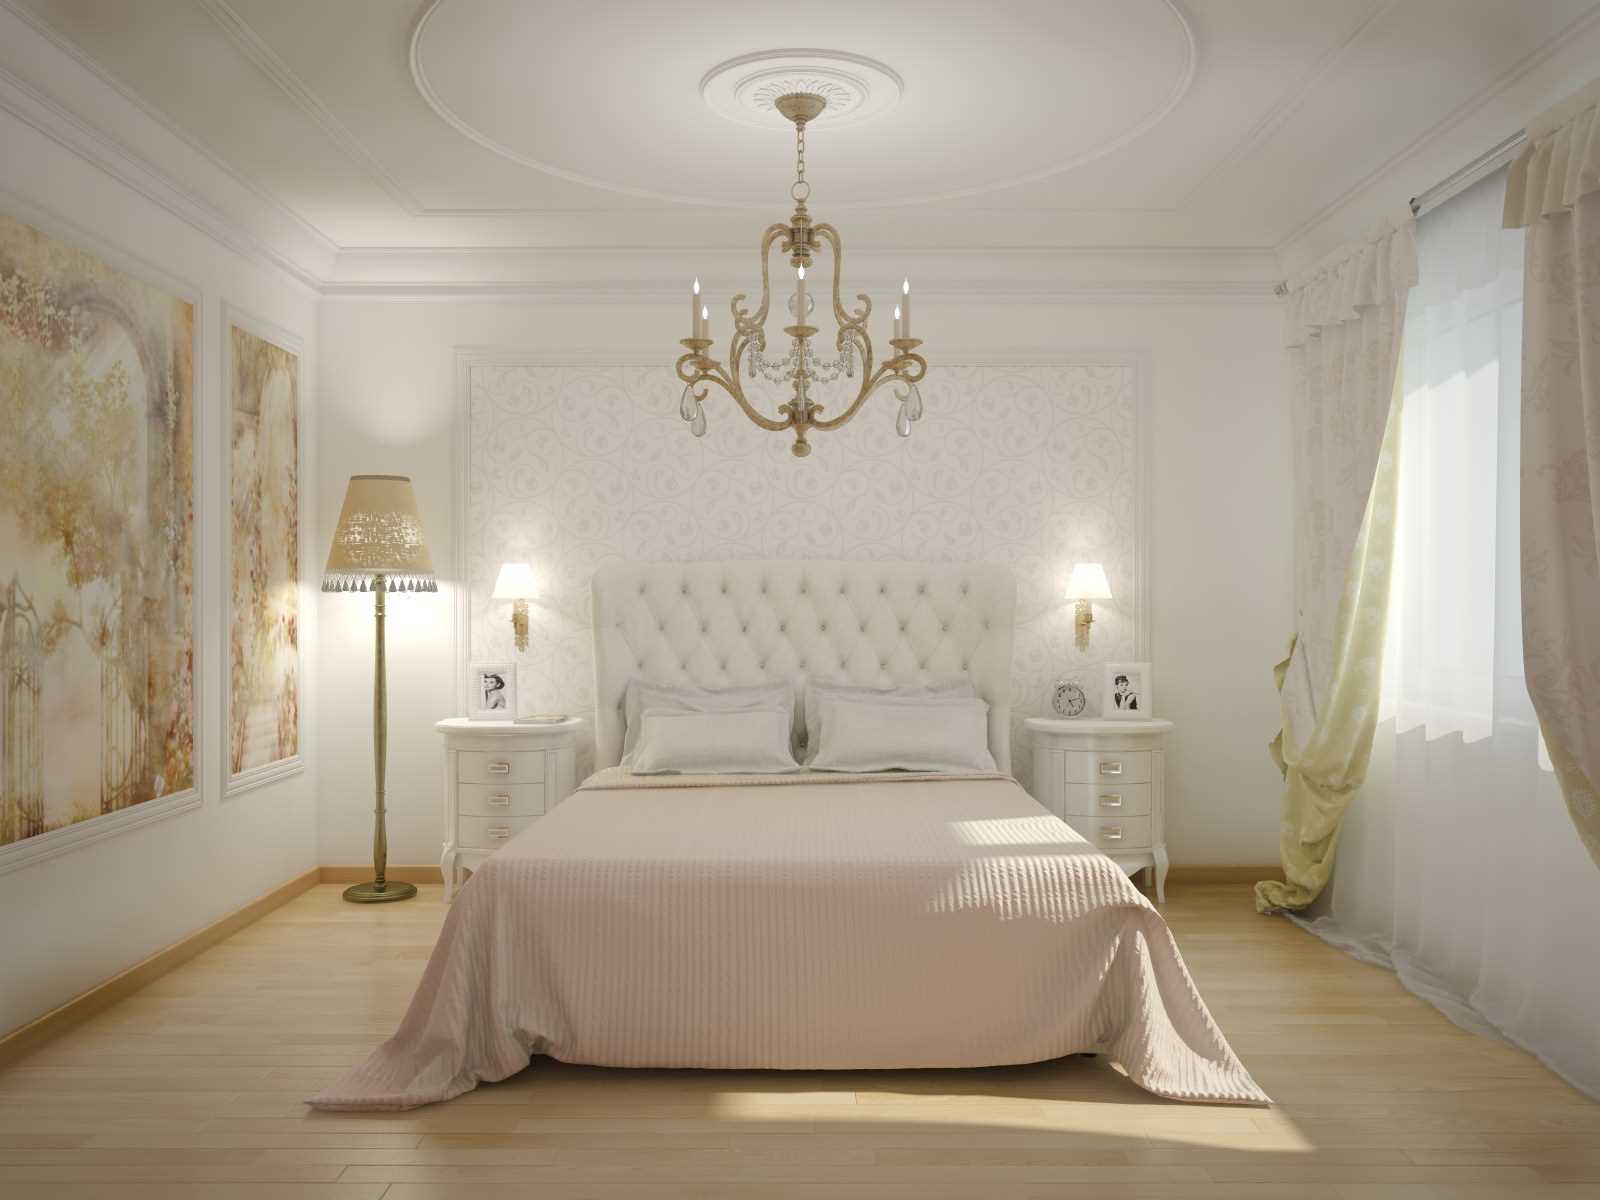 variant of the unusual interior of a white bedroom